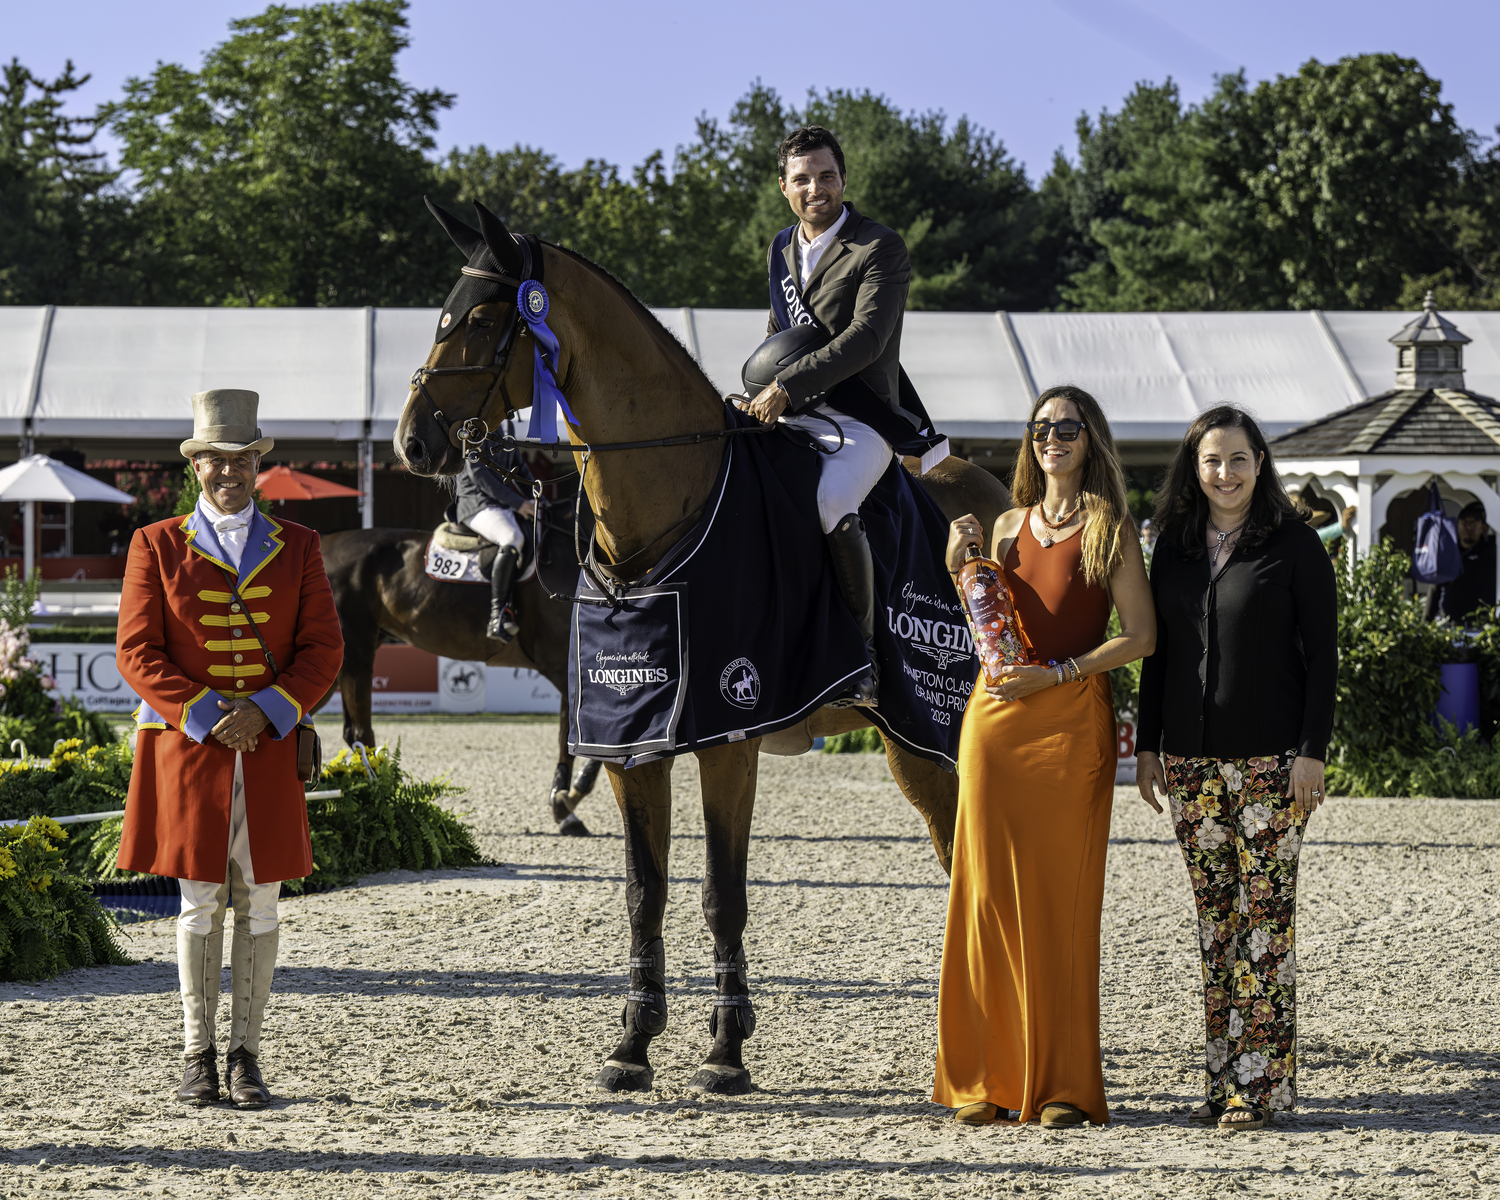 From left, Alan Keeley, Daniel Bluman and Ladriano Z, Joey Wolffer, and Hampton Classic Executive Director Shanette Barth-Cohen during the award presentation after the Grand Prix. MARIANNE BARNETT